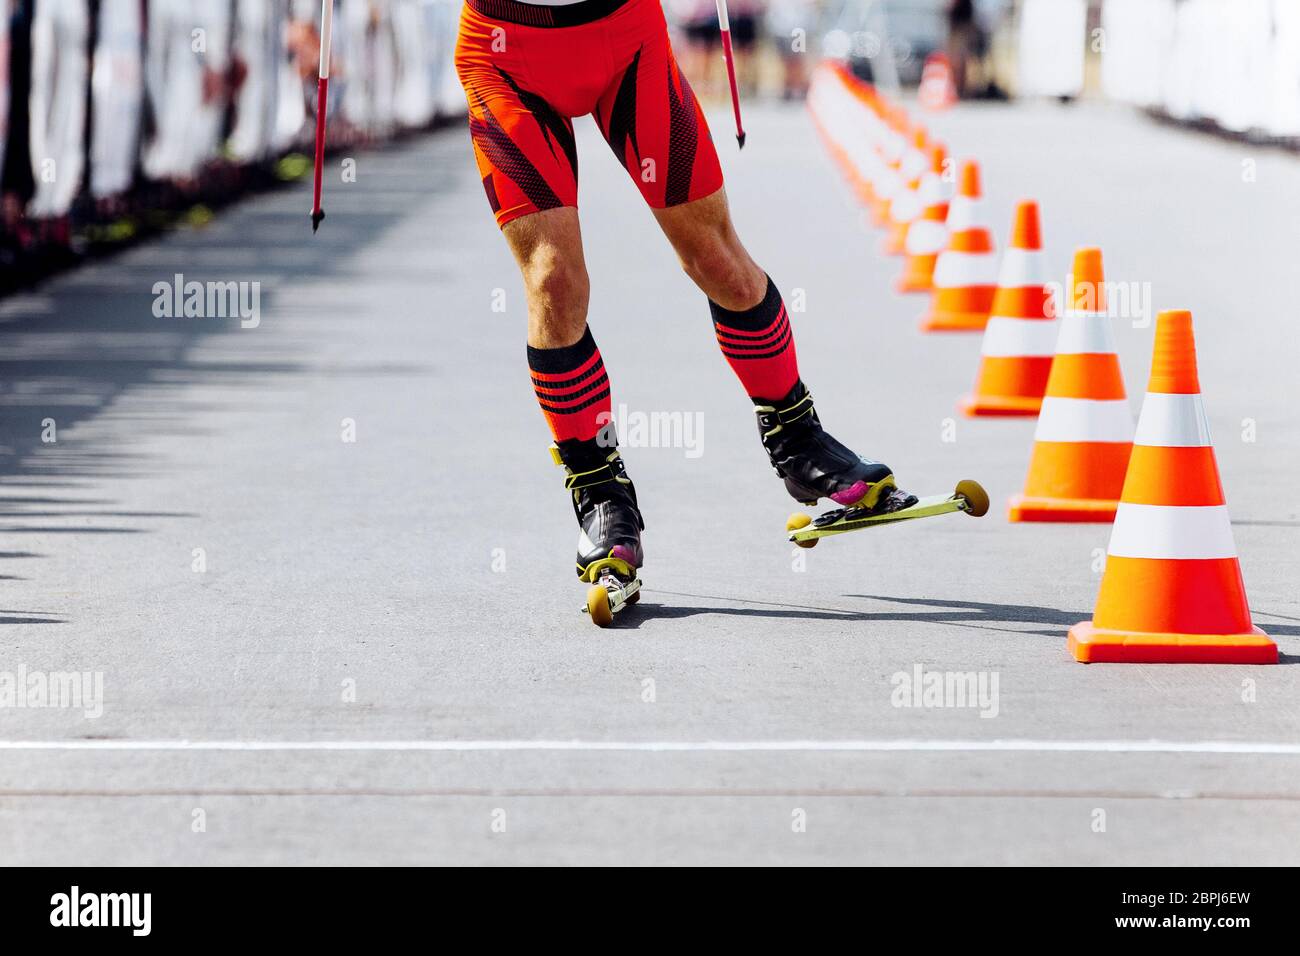 athlete skier finish in roller skiing competition Stock Photo